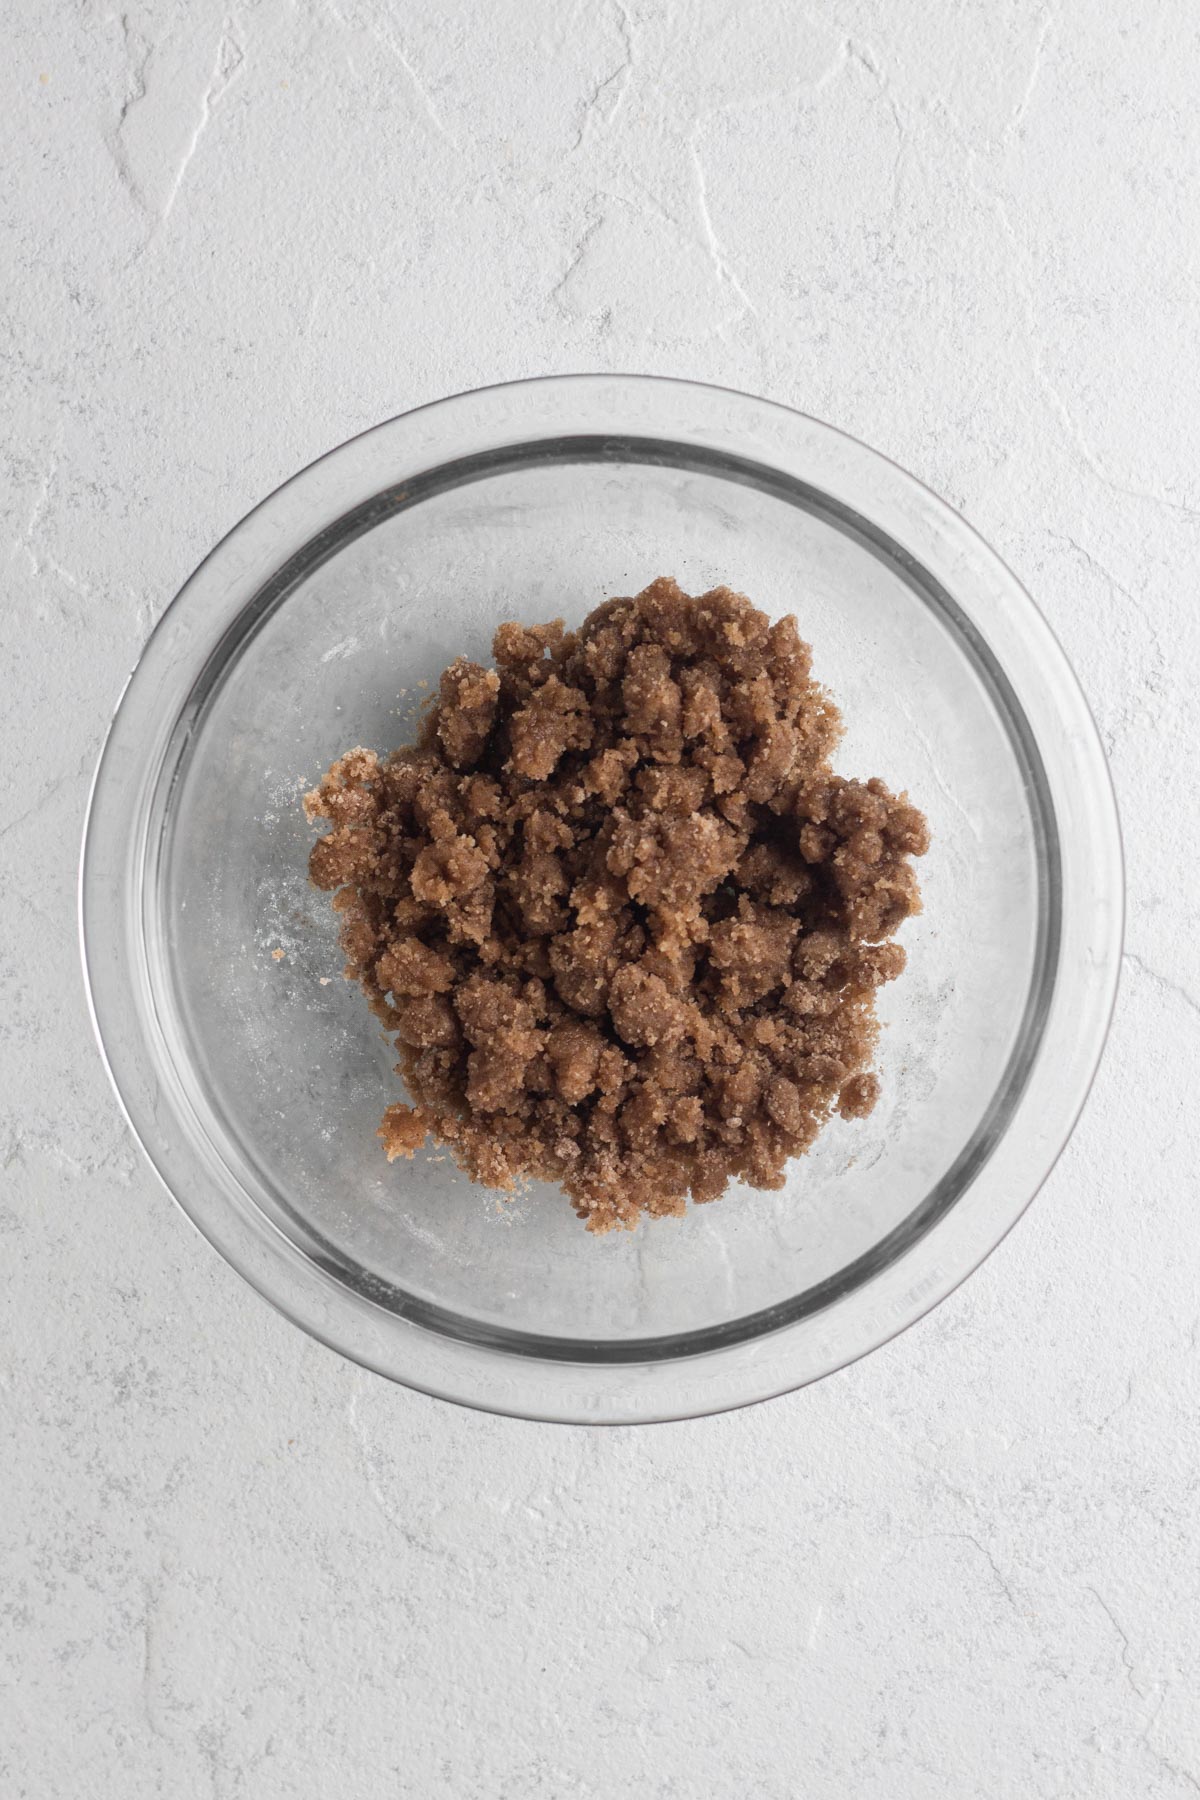 Streusel topping in a glass bowl on a white surface.